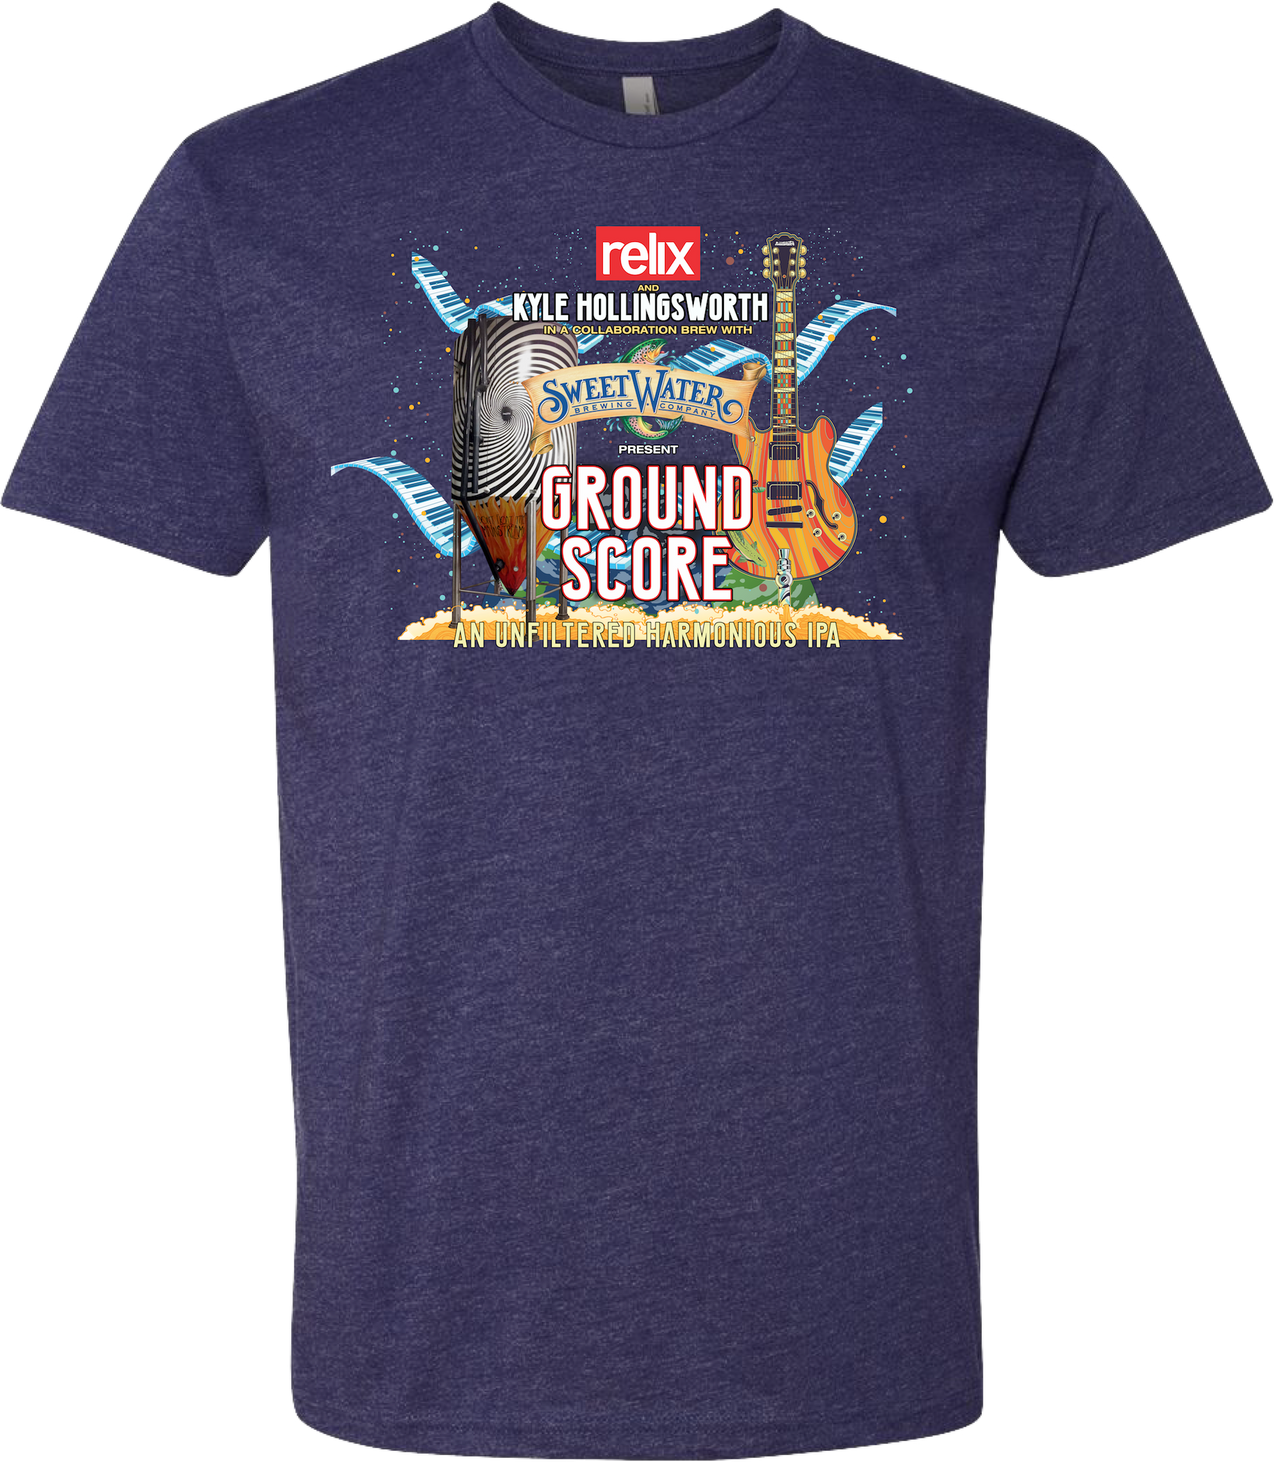 Relix Collaboration with Kyle Hollingsworth & Sweetwater Brewing Official T-Shirt “Ground Score IPA”